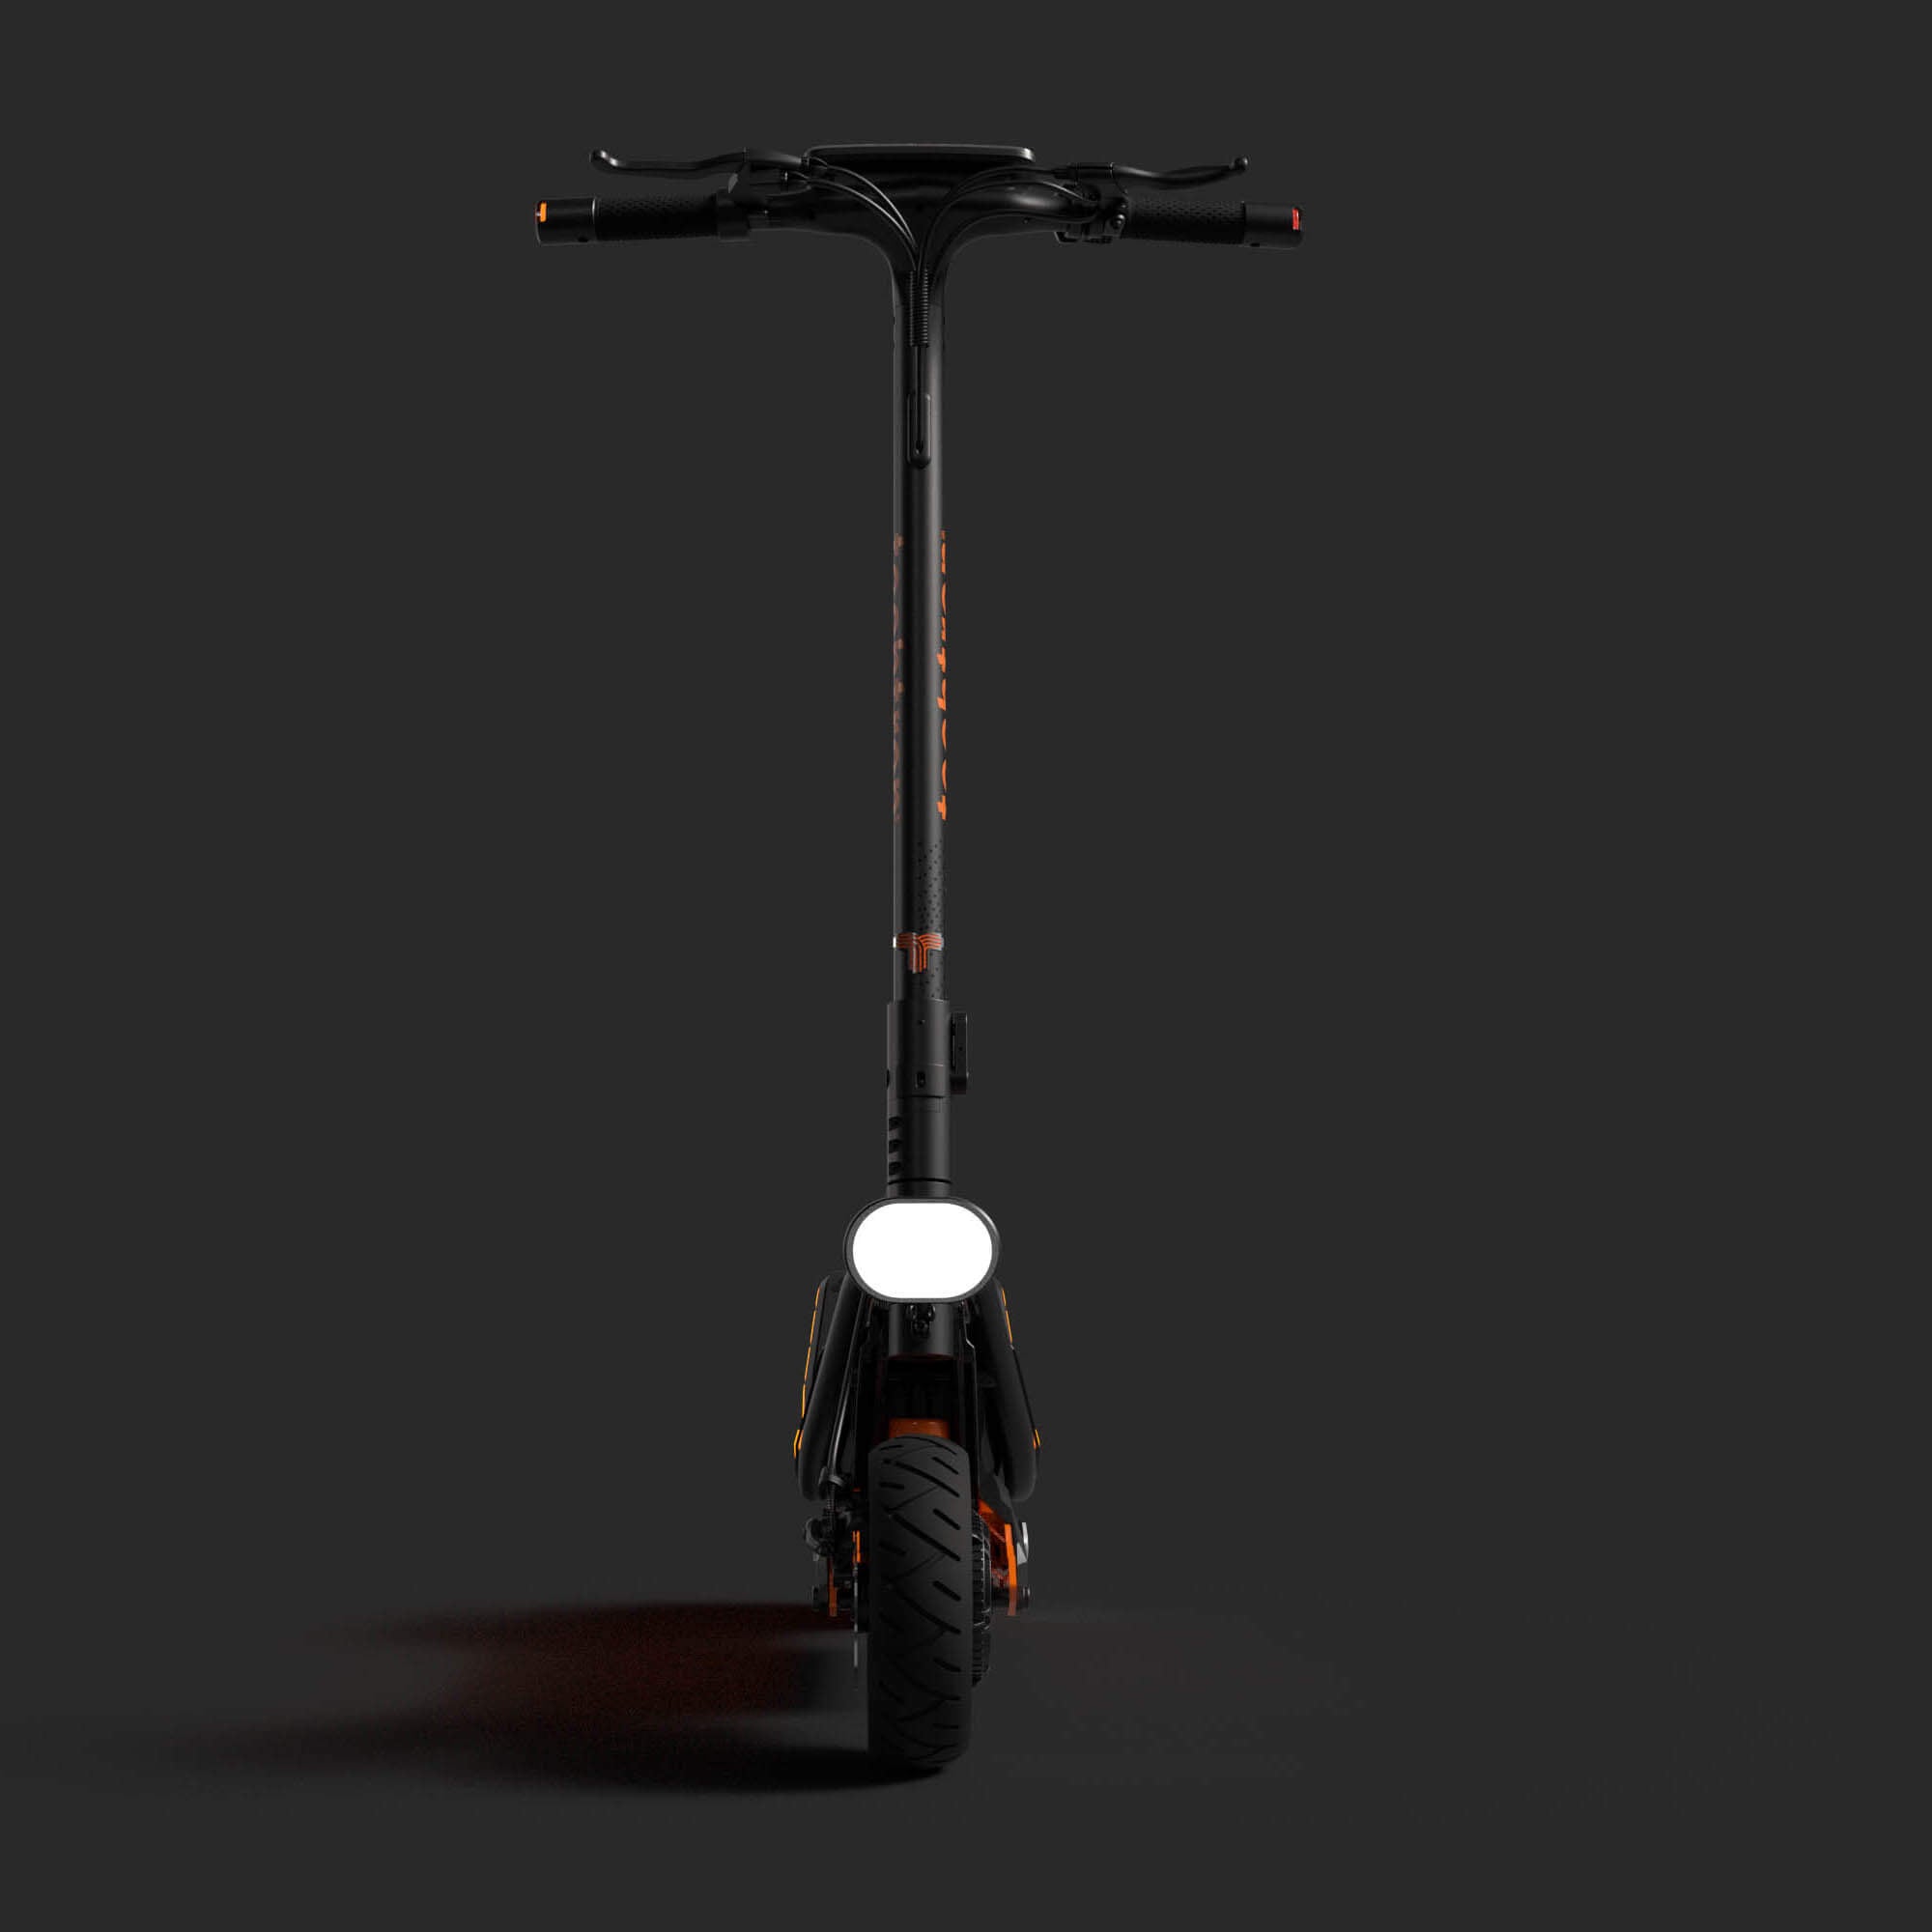 techtron TS10+ VOX - 2 kW* Electric Scooter - Dual System Hydraulic techtron